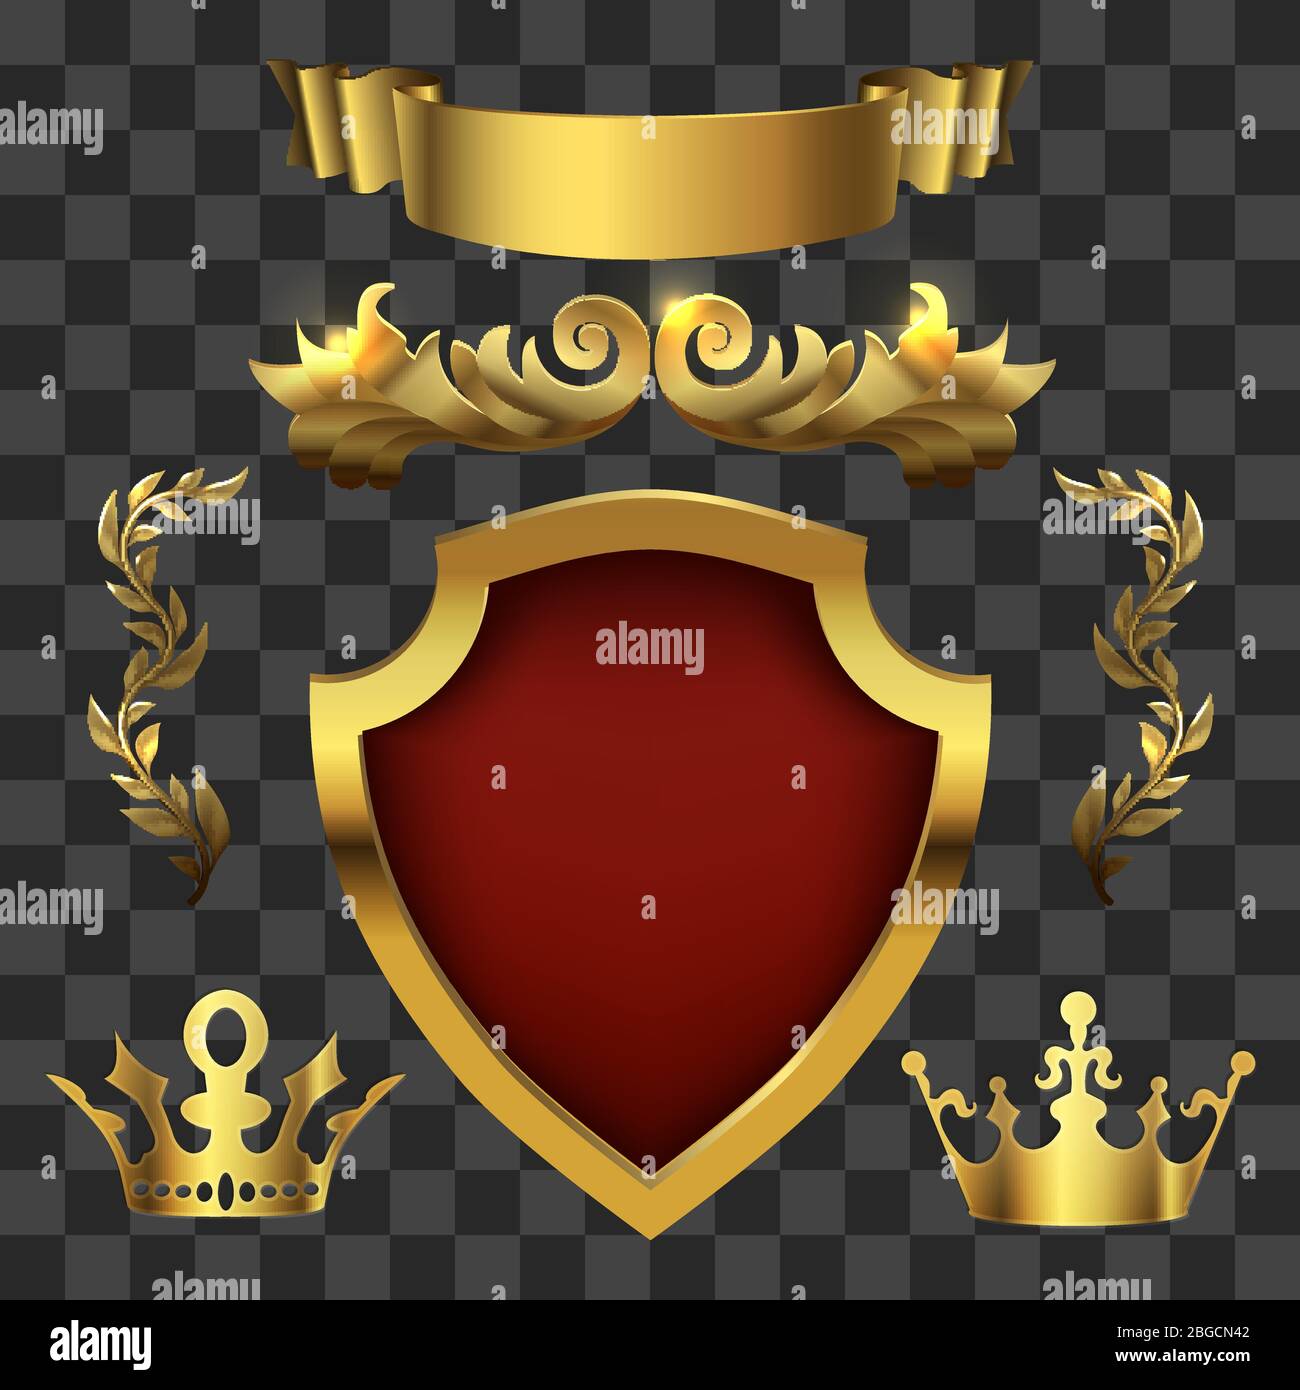 Golden heraldic elements. Kings crowns, banners isolated on transparent background. Vector illustration Stock Vector